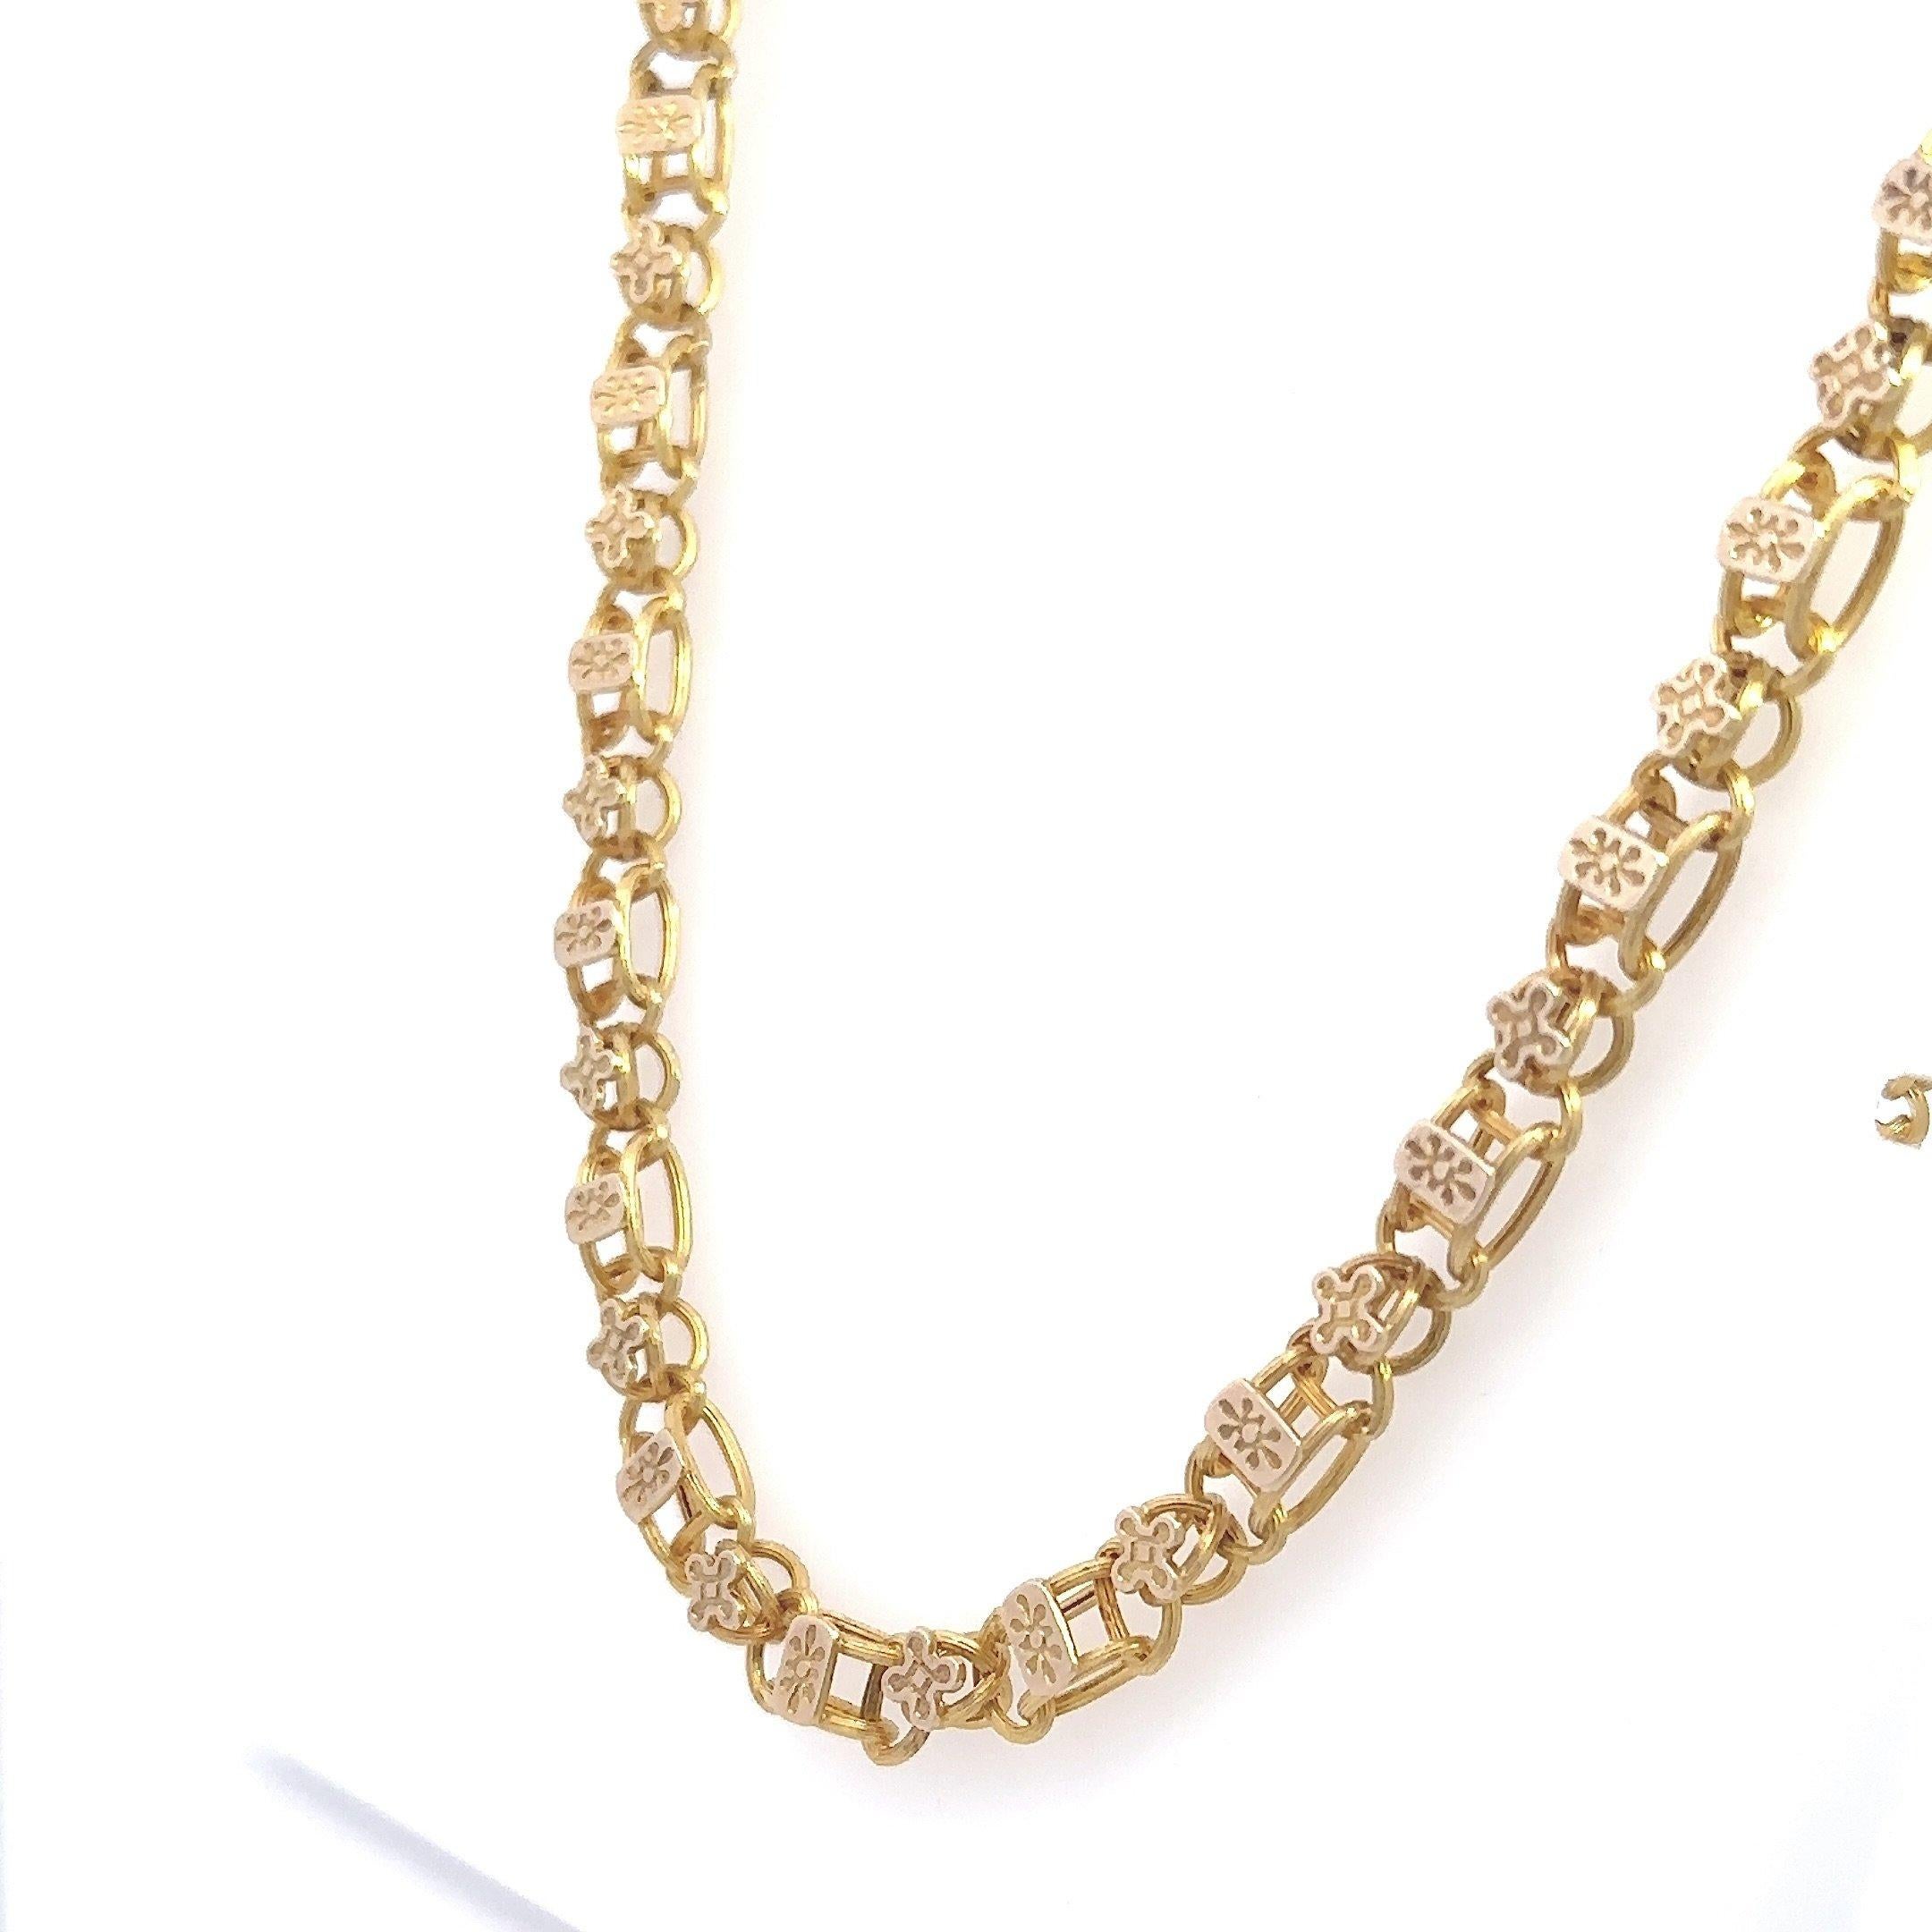 Vintage 21KT Yellow Gold Book Link Chain In Good Condition For Sale In Los Angeles, CA